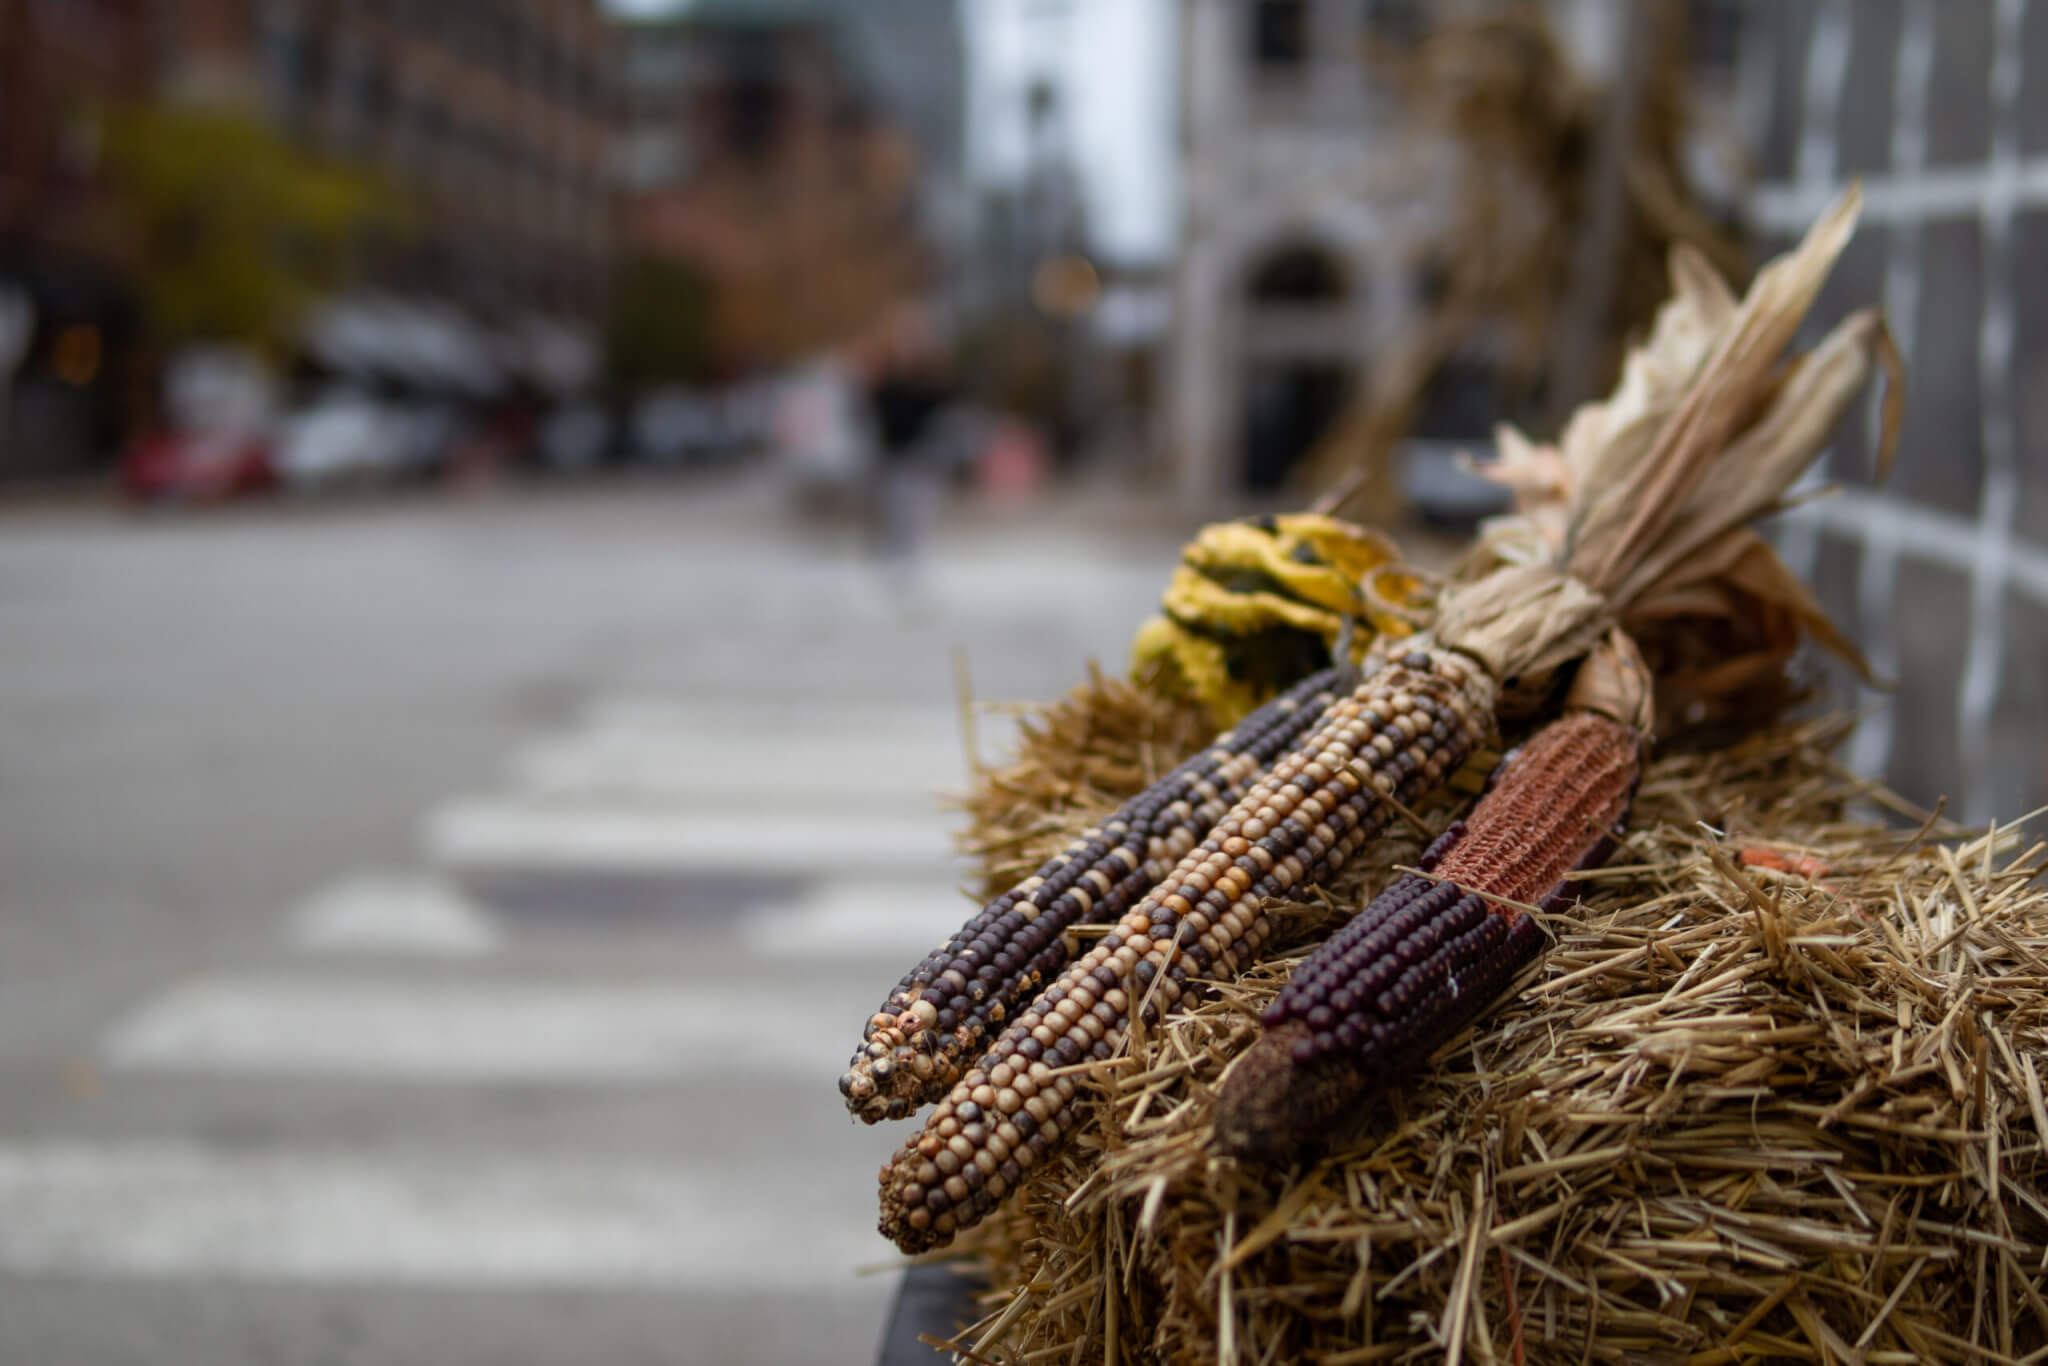 Indian Corn Decorations along a City Street in Chicago Illinois during Autumn